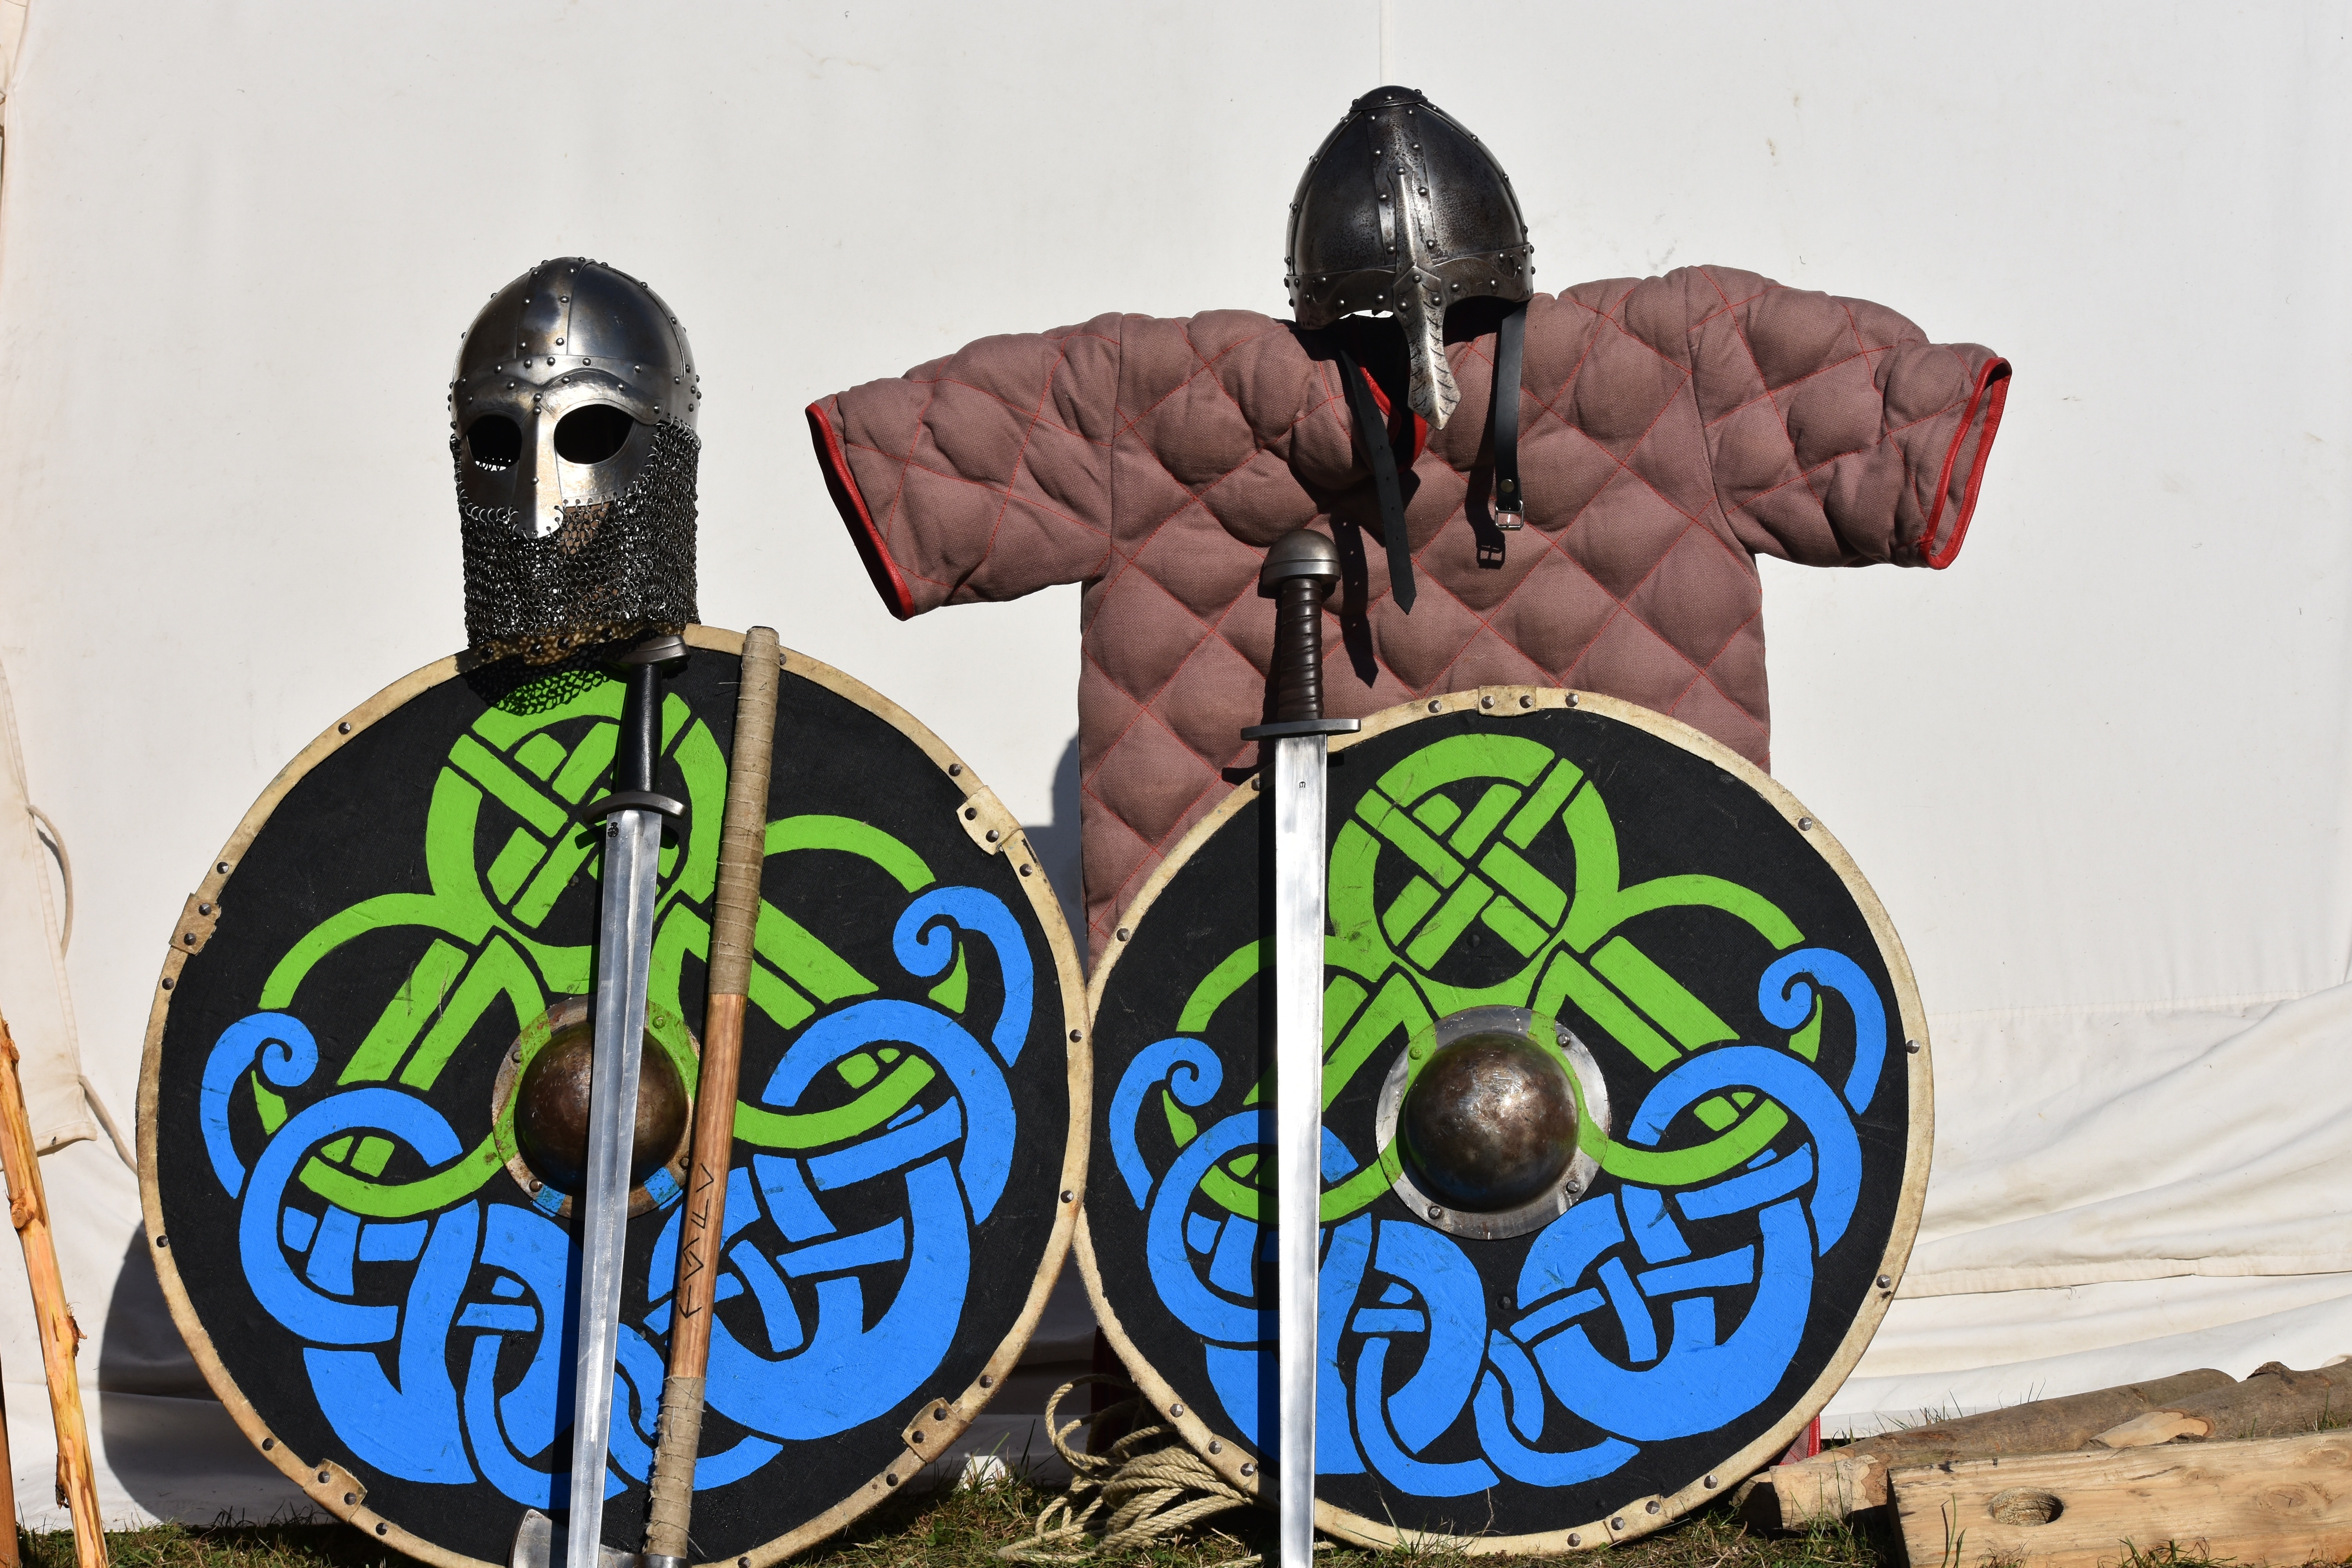 medieval costume and gears